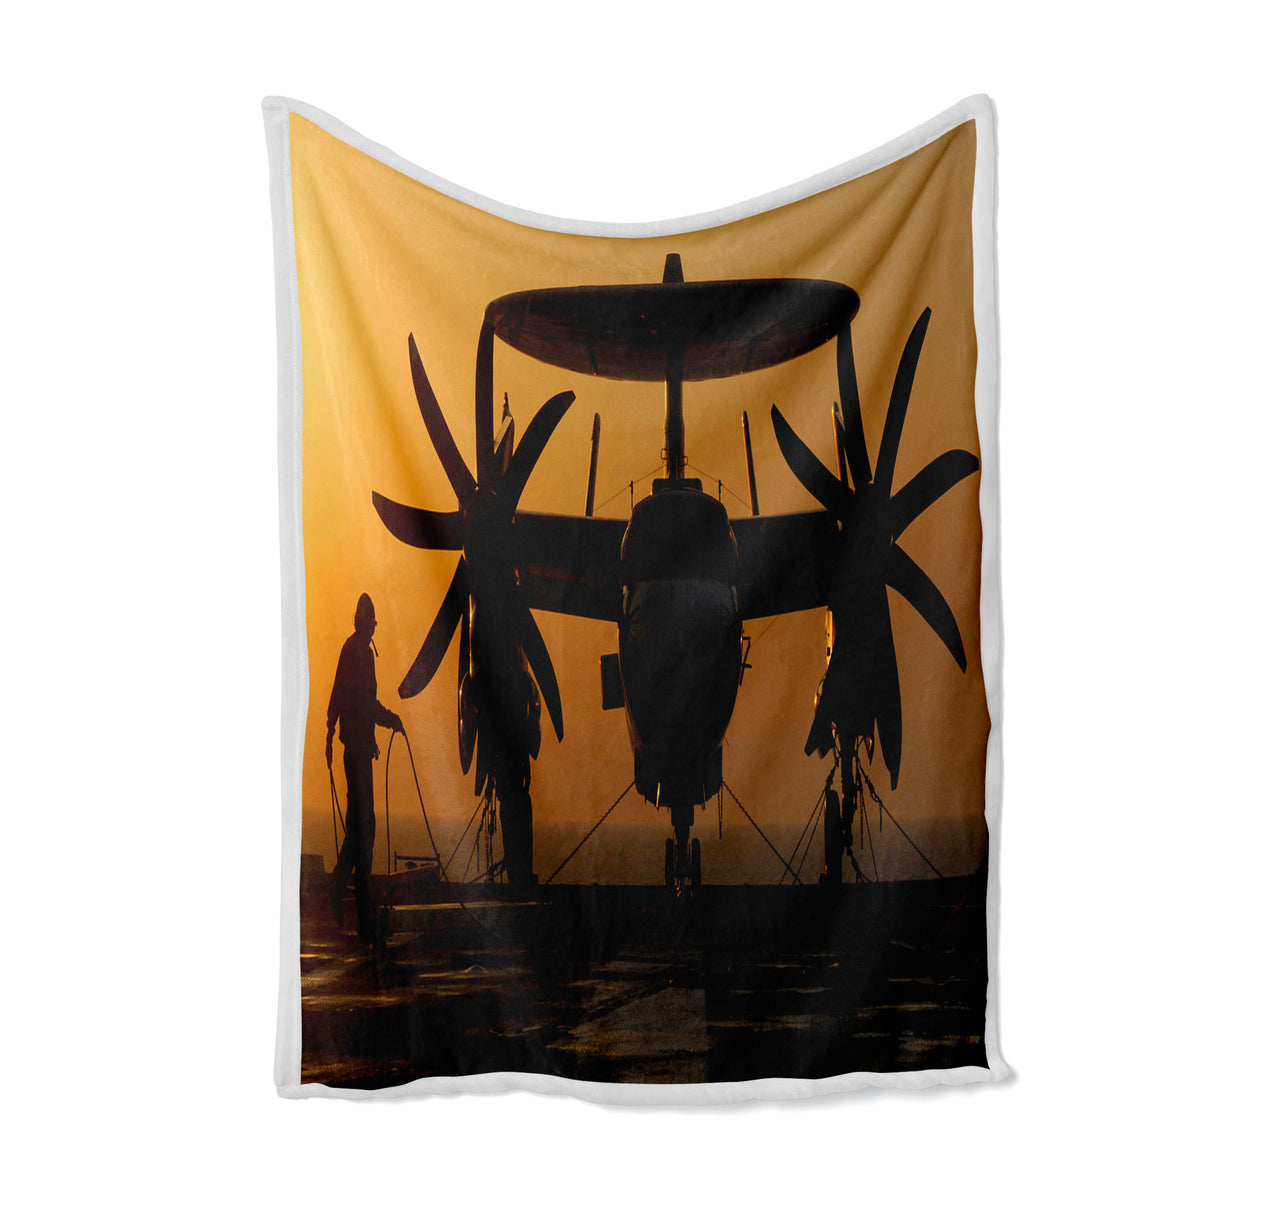 Military Plane at Sunset Designed Bed Blankets & Covers